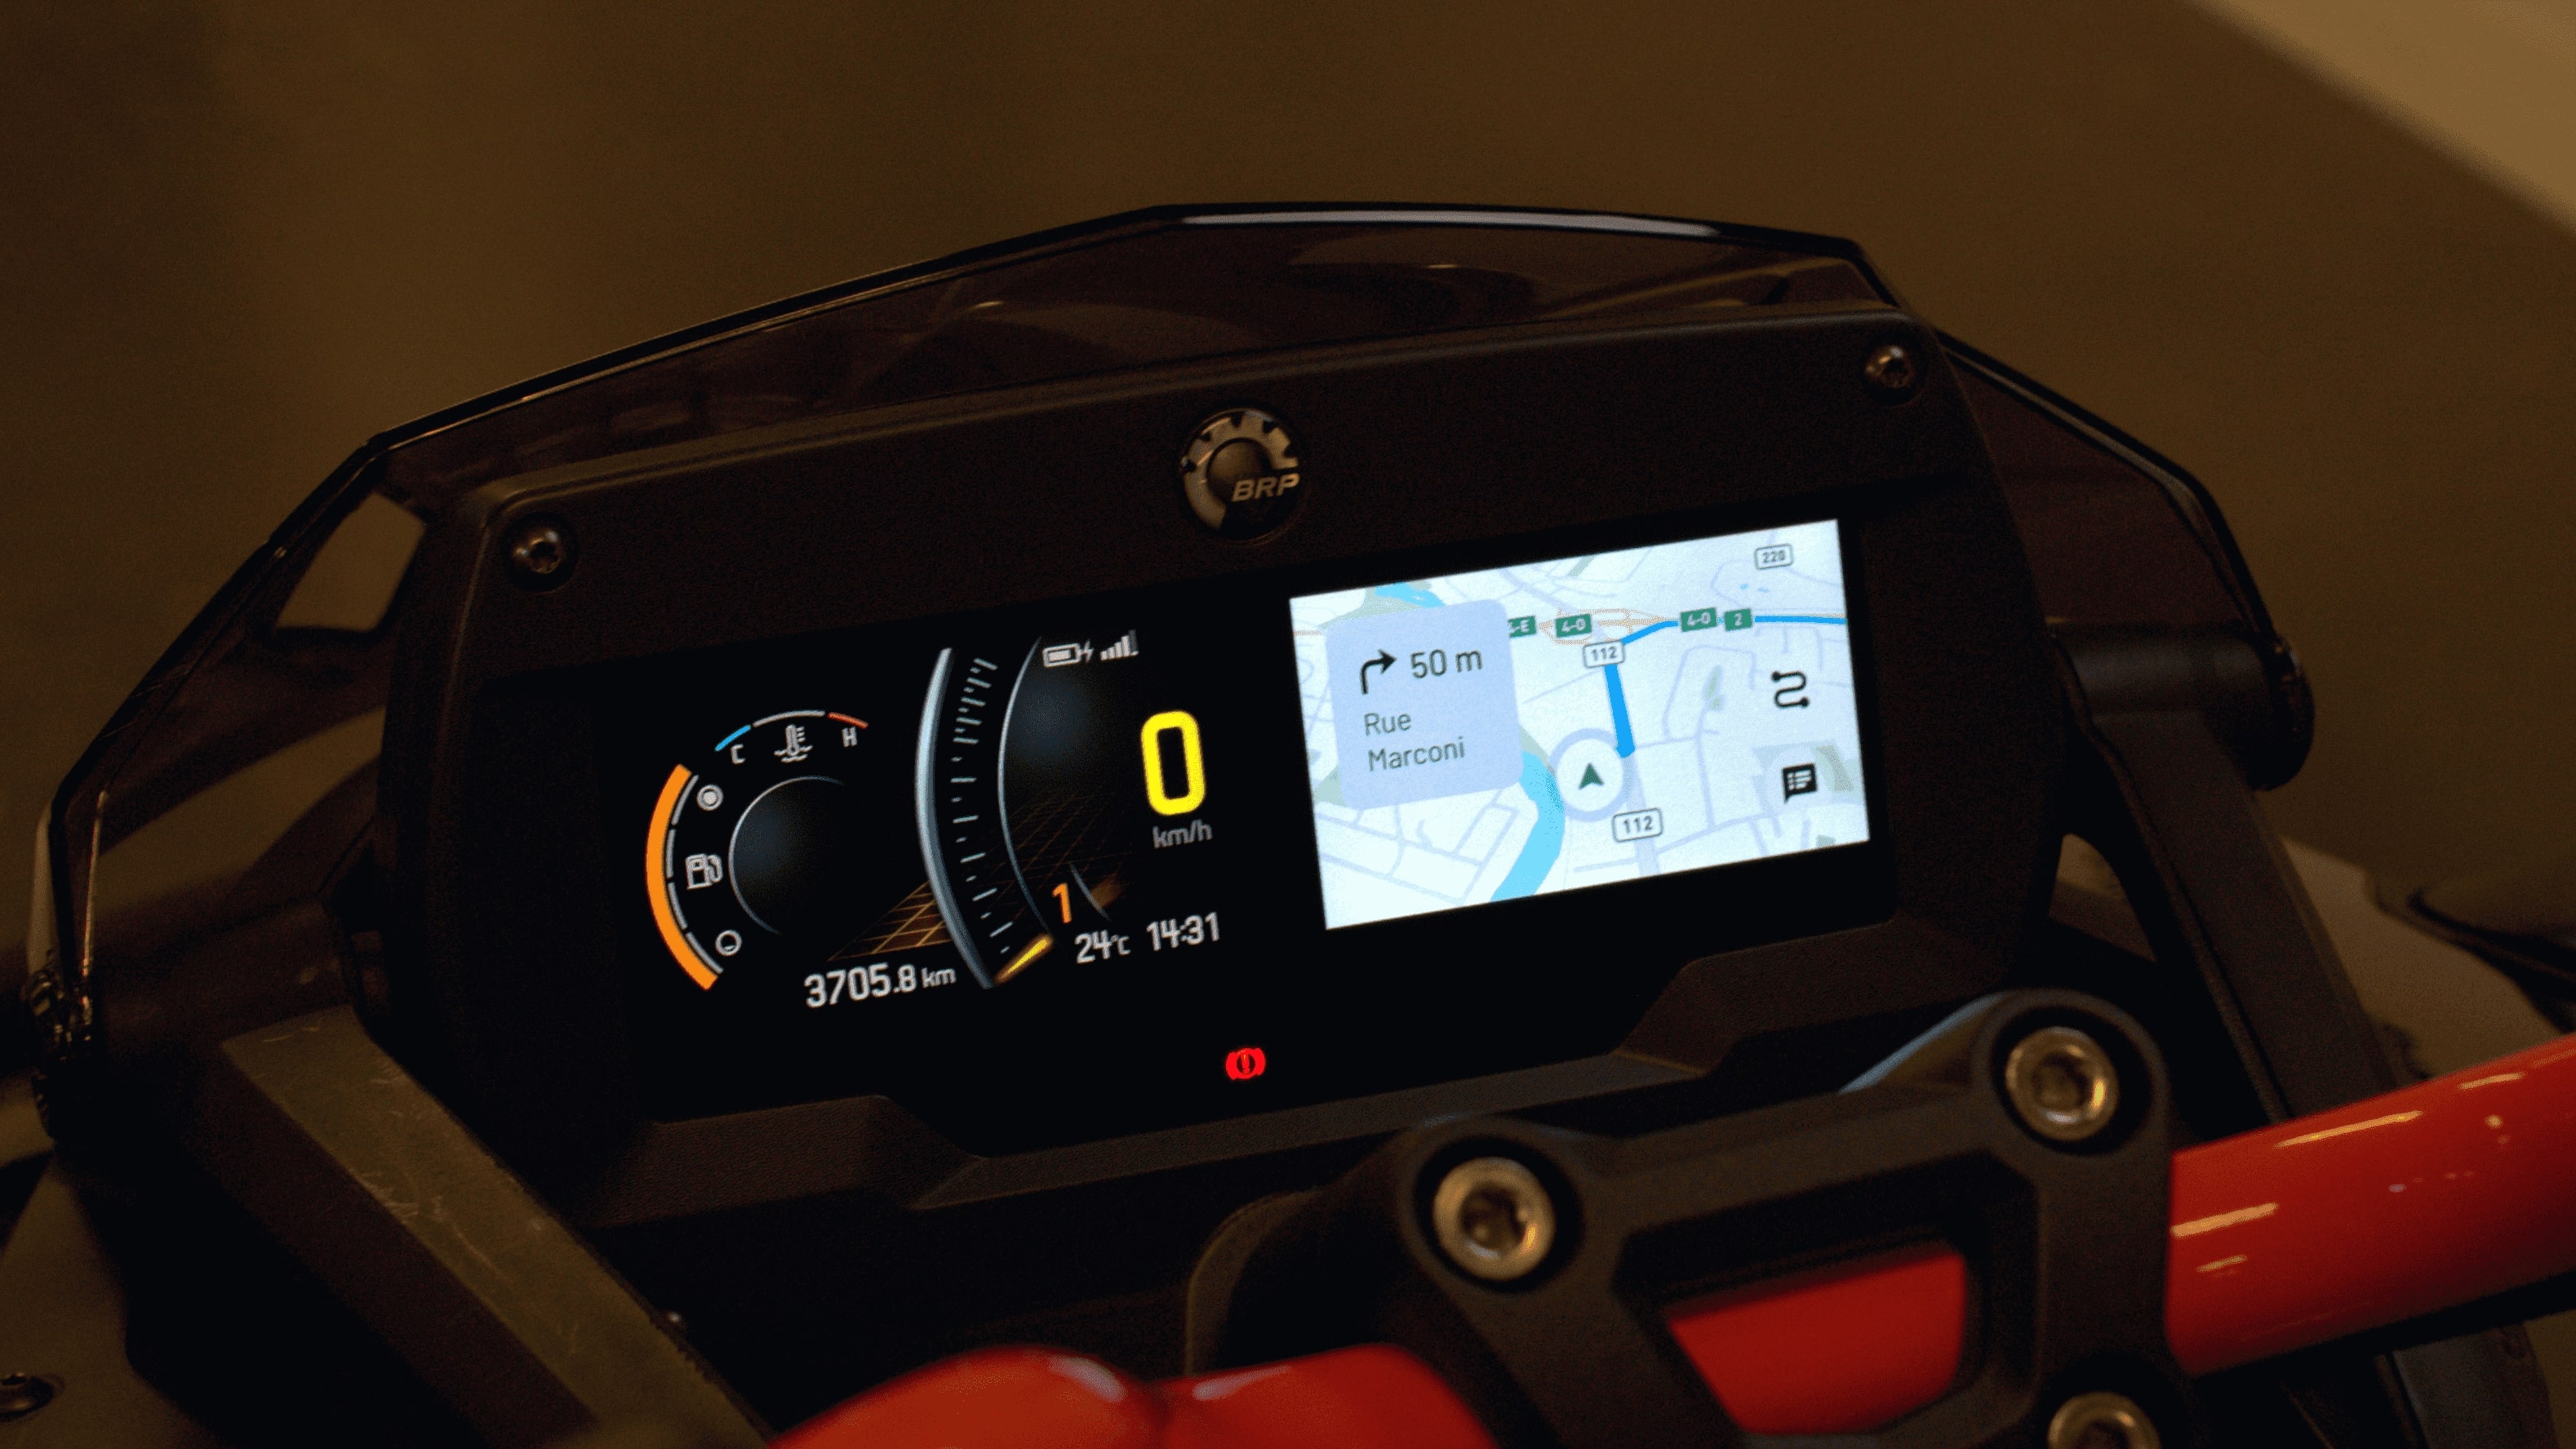 The large 7.8” wide LCD color display on a Can-Am Spyder